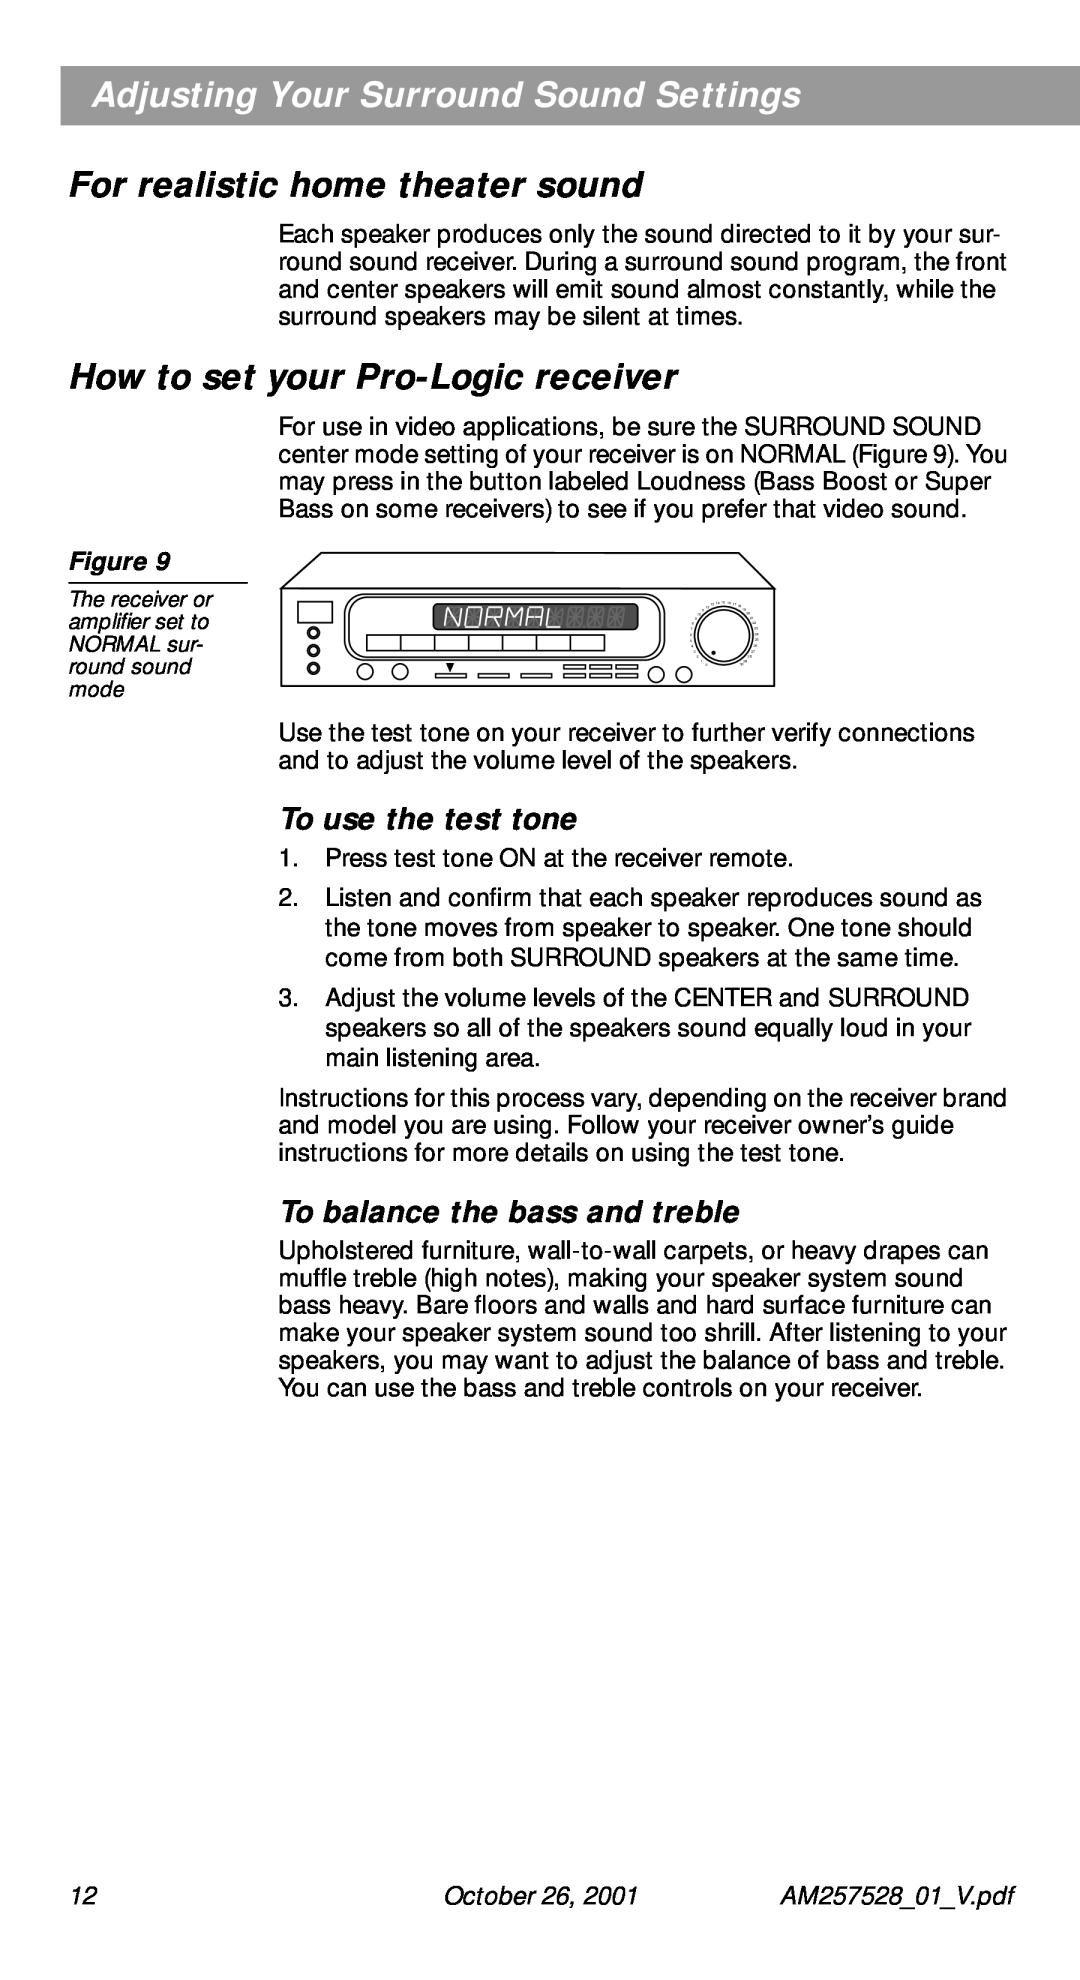 Bose 30 Series II Adjusting Your Surround Sound Settings, For realistic home theater sound, To use the test tone, October 